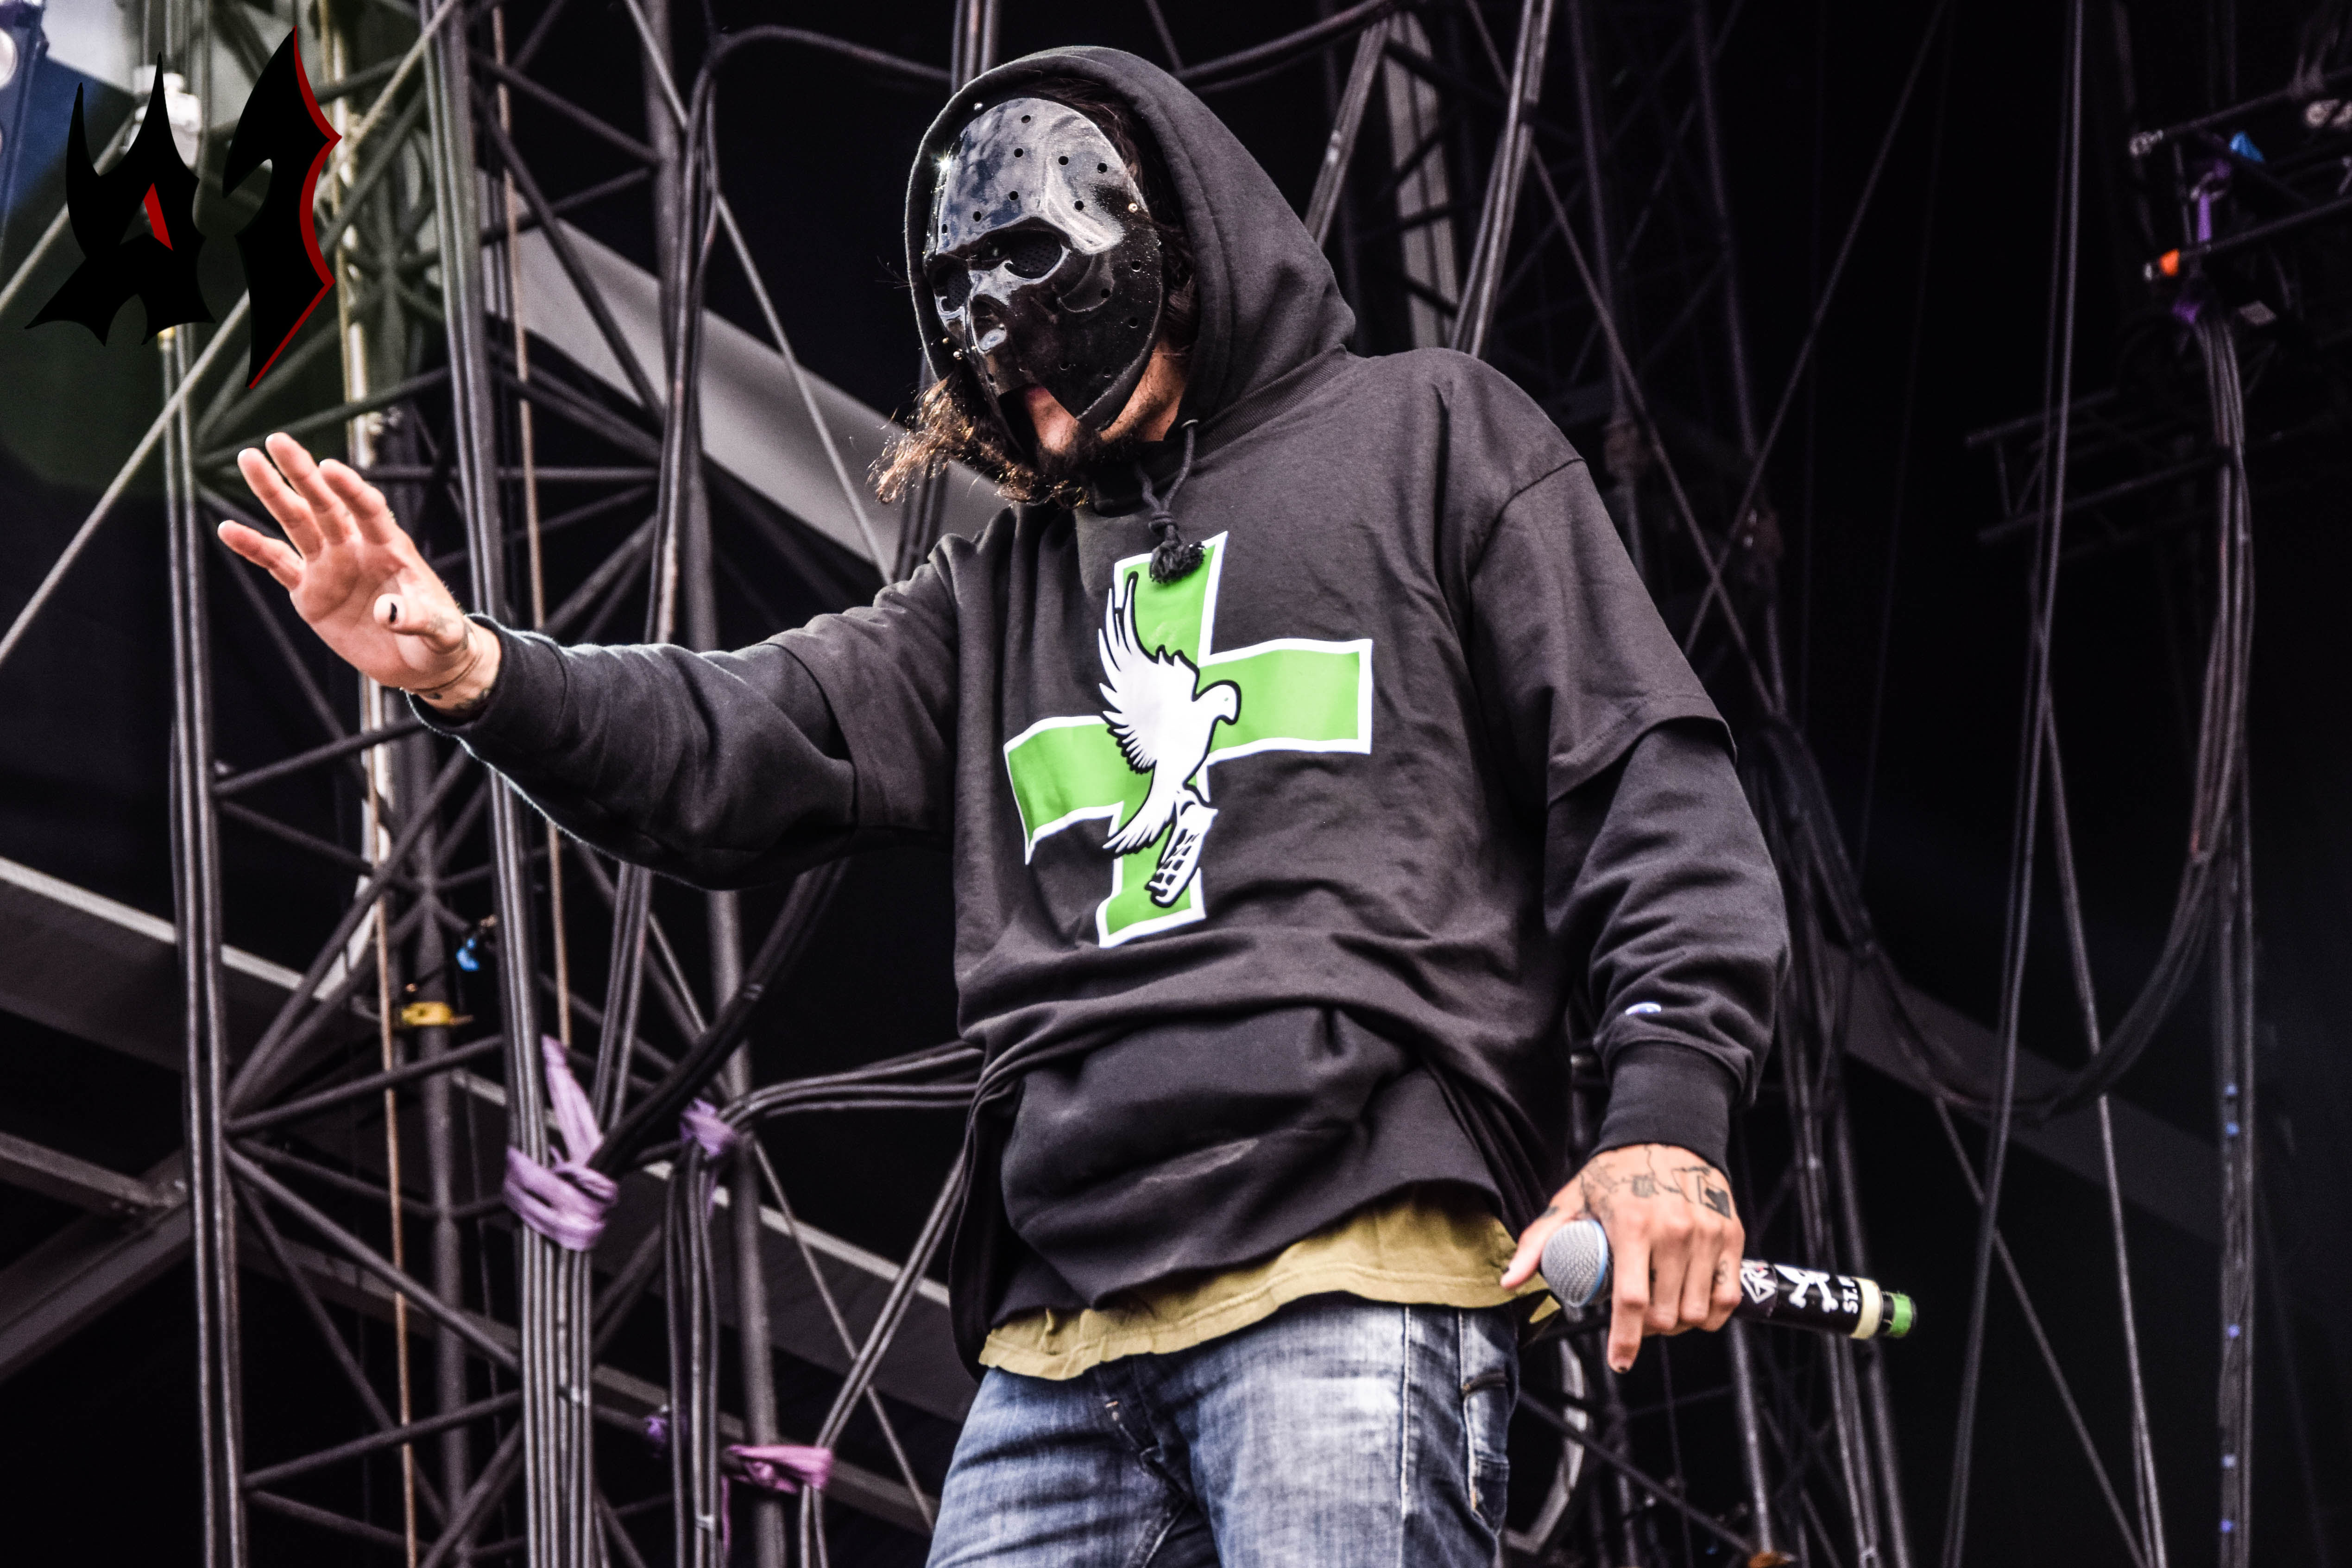 Donwload 2018 – Day 2 - Hollywood Undead 3